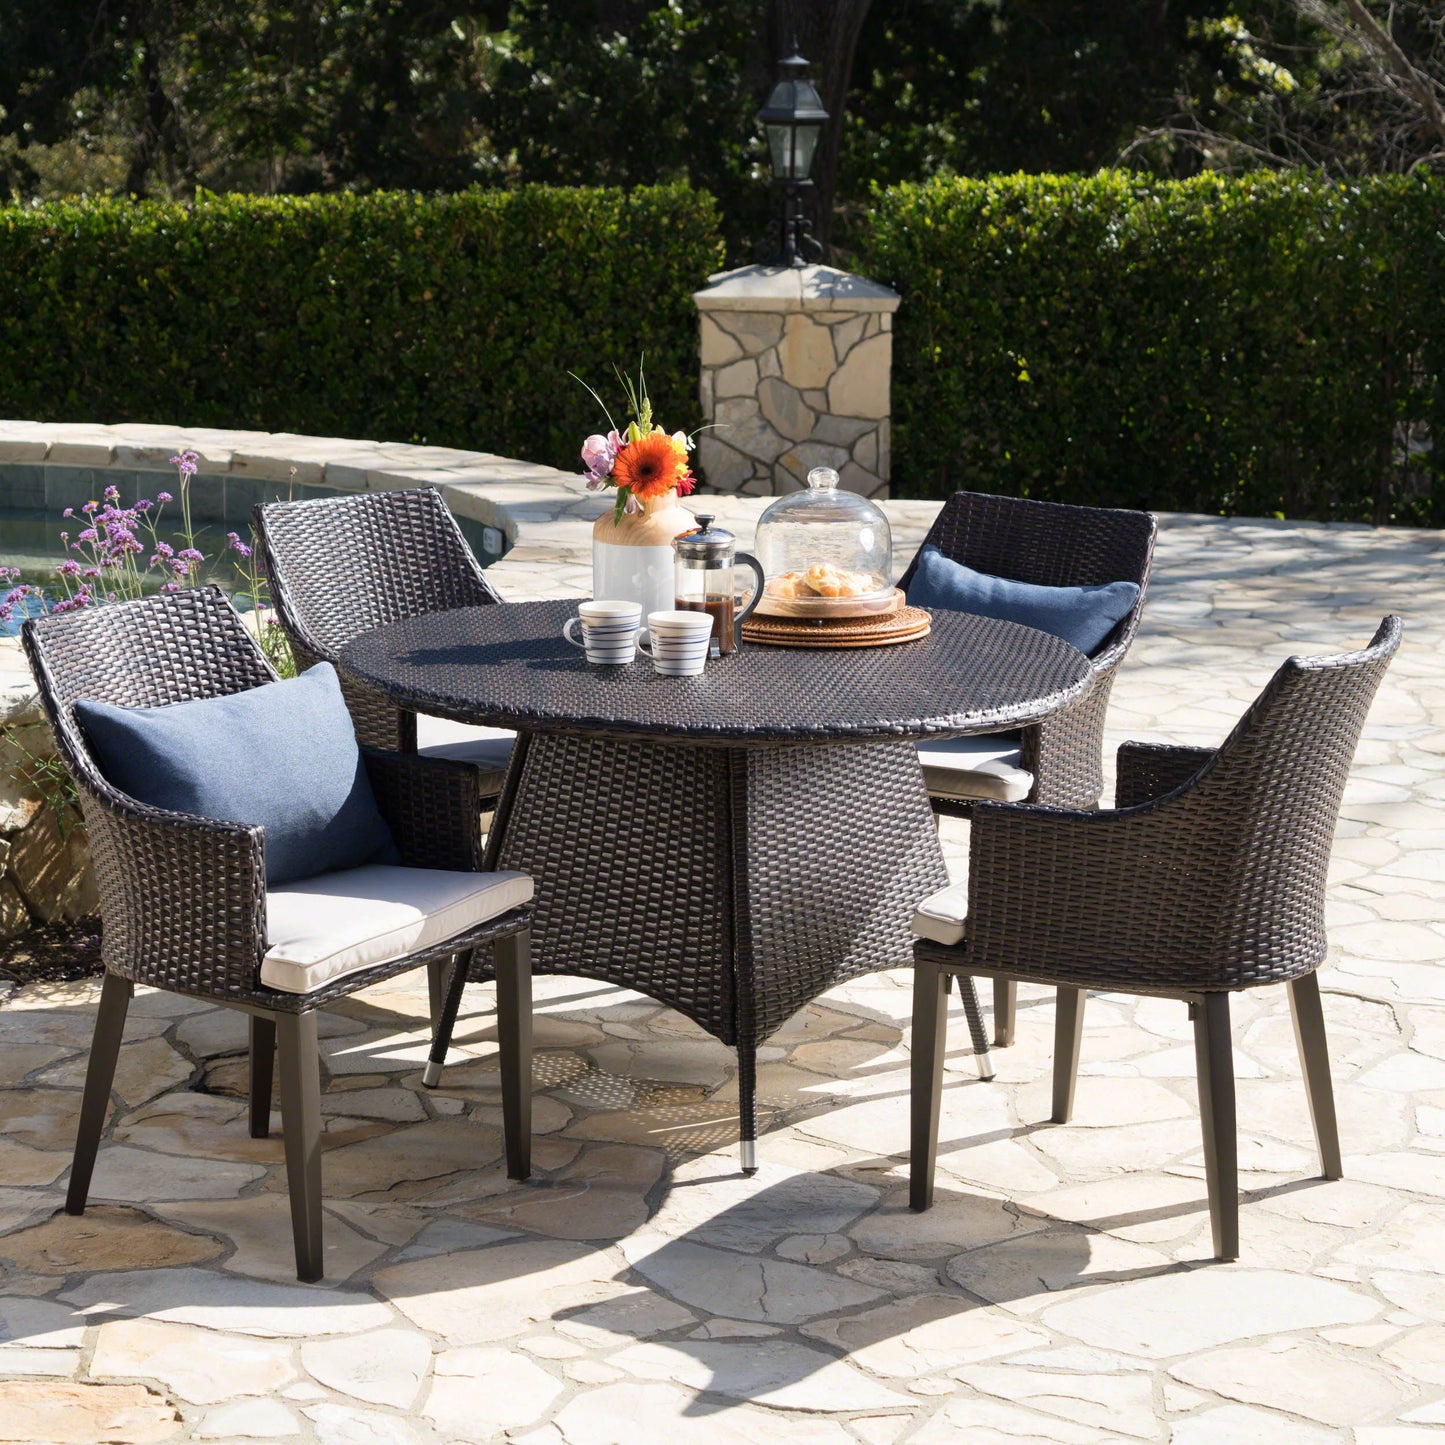 Leeward Outdoor 5 Piece Wicker Round Dining Set with Water Resistant Cushions